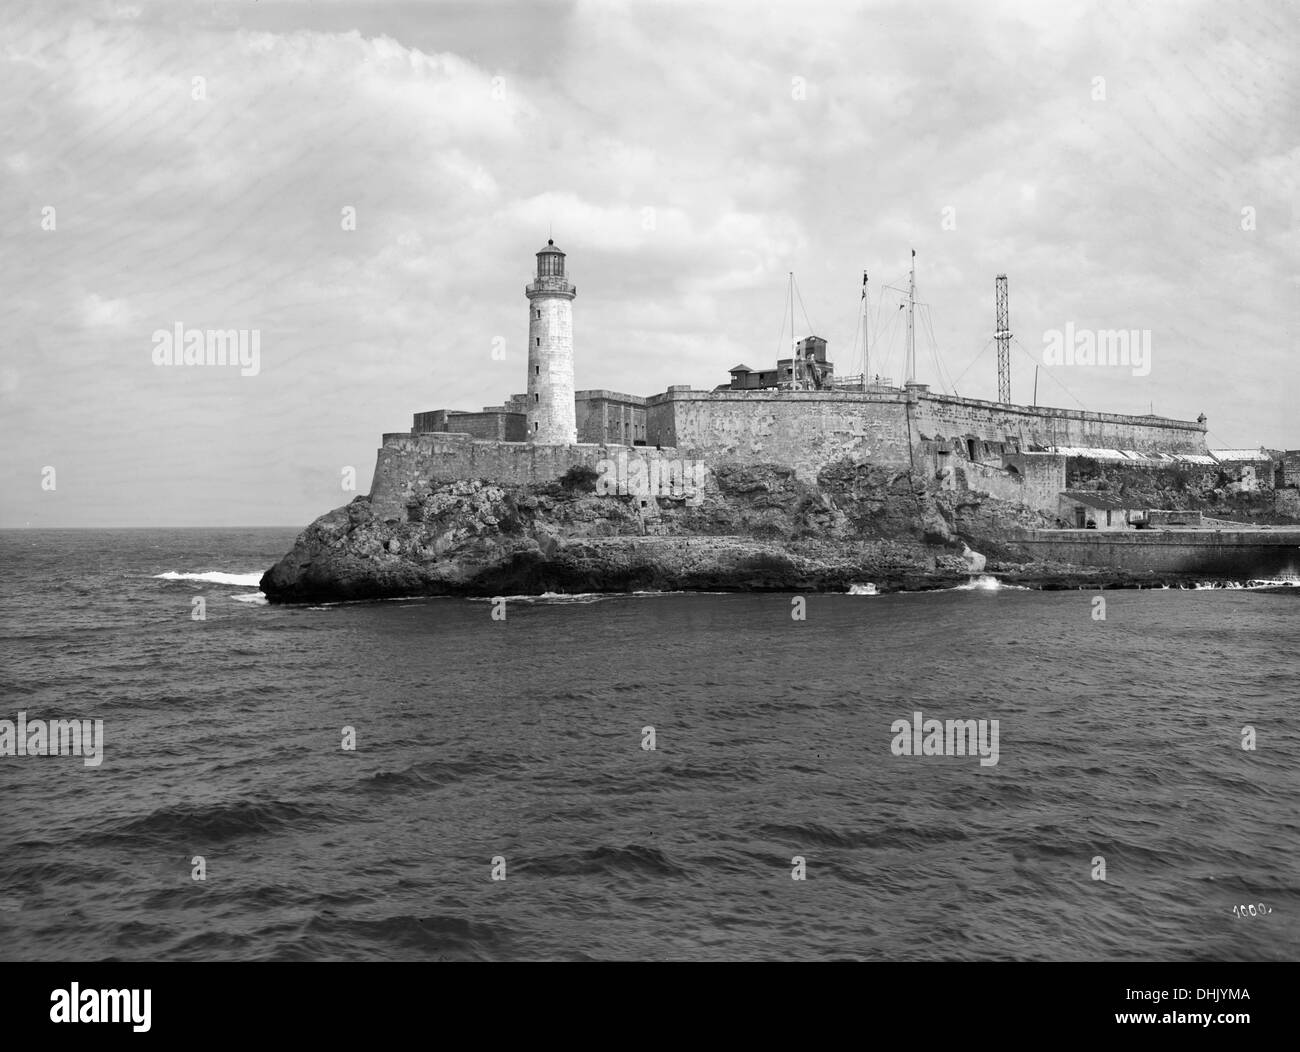 View of the Castillo del Morro with lighthouse and radio installations from the Gulf of Mexico on La Habana, Cuba, around 1910. The image was taken by the German photographer Oswald Lübeck, one of the earliest representatives of travel photography and ship photography aboard passenger ships. Photo: Deutsche Fotothek/Oswald Lübeck Stock Photo